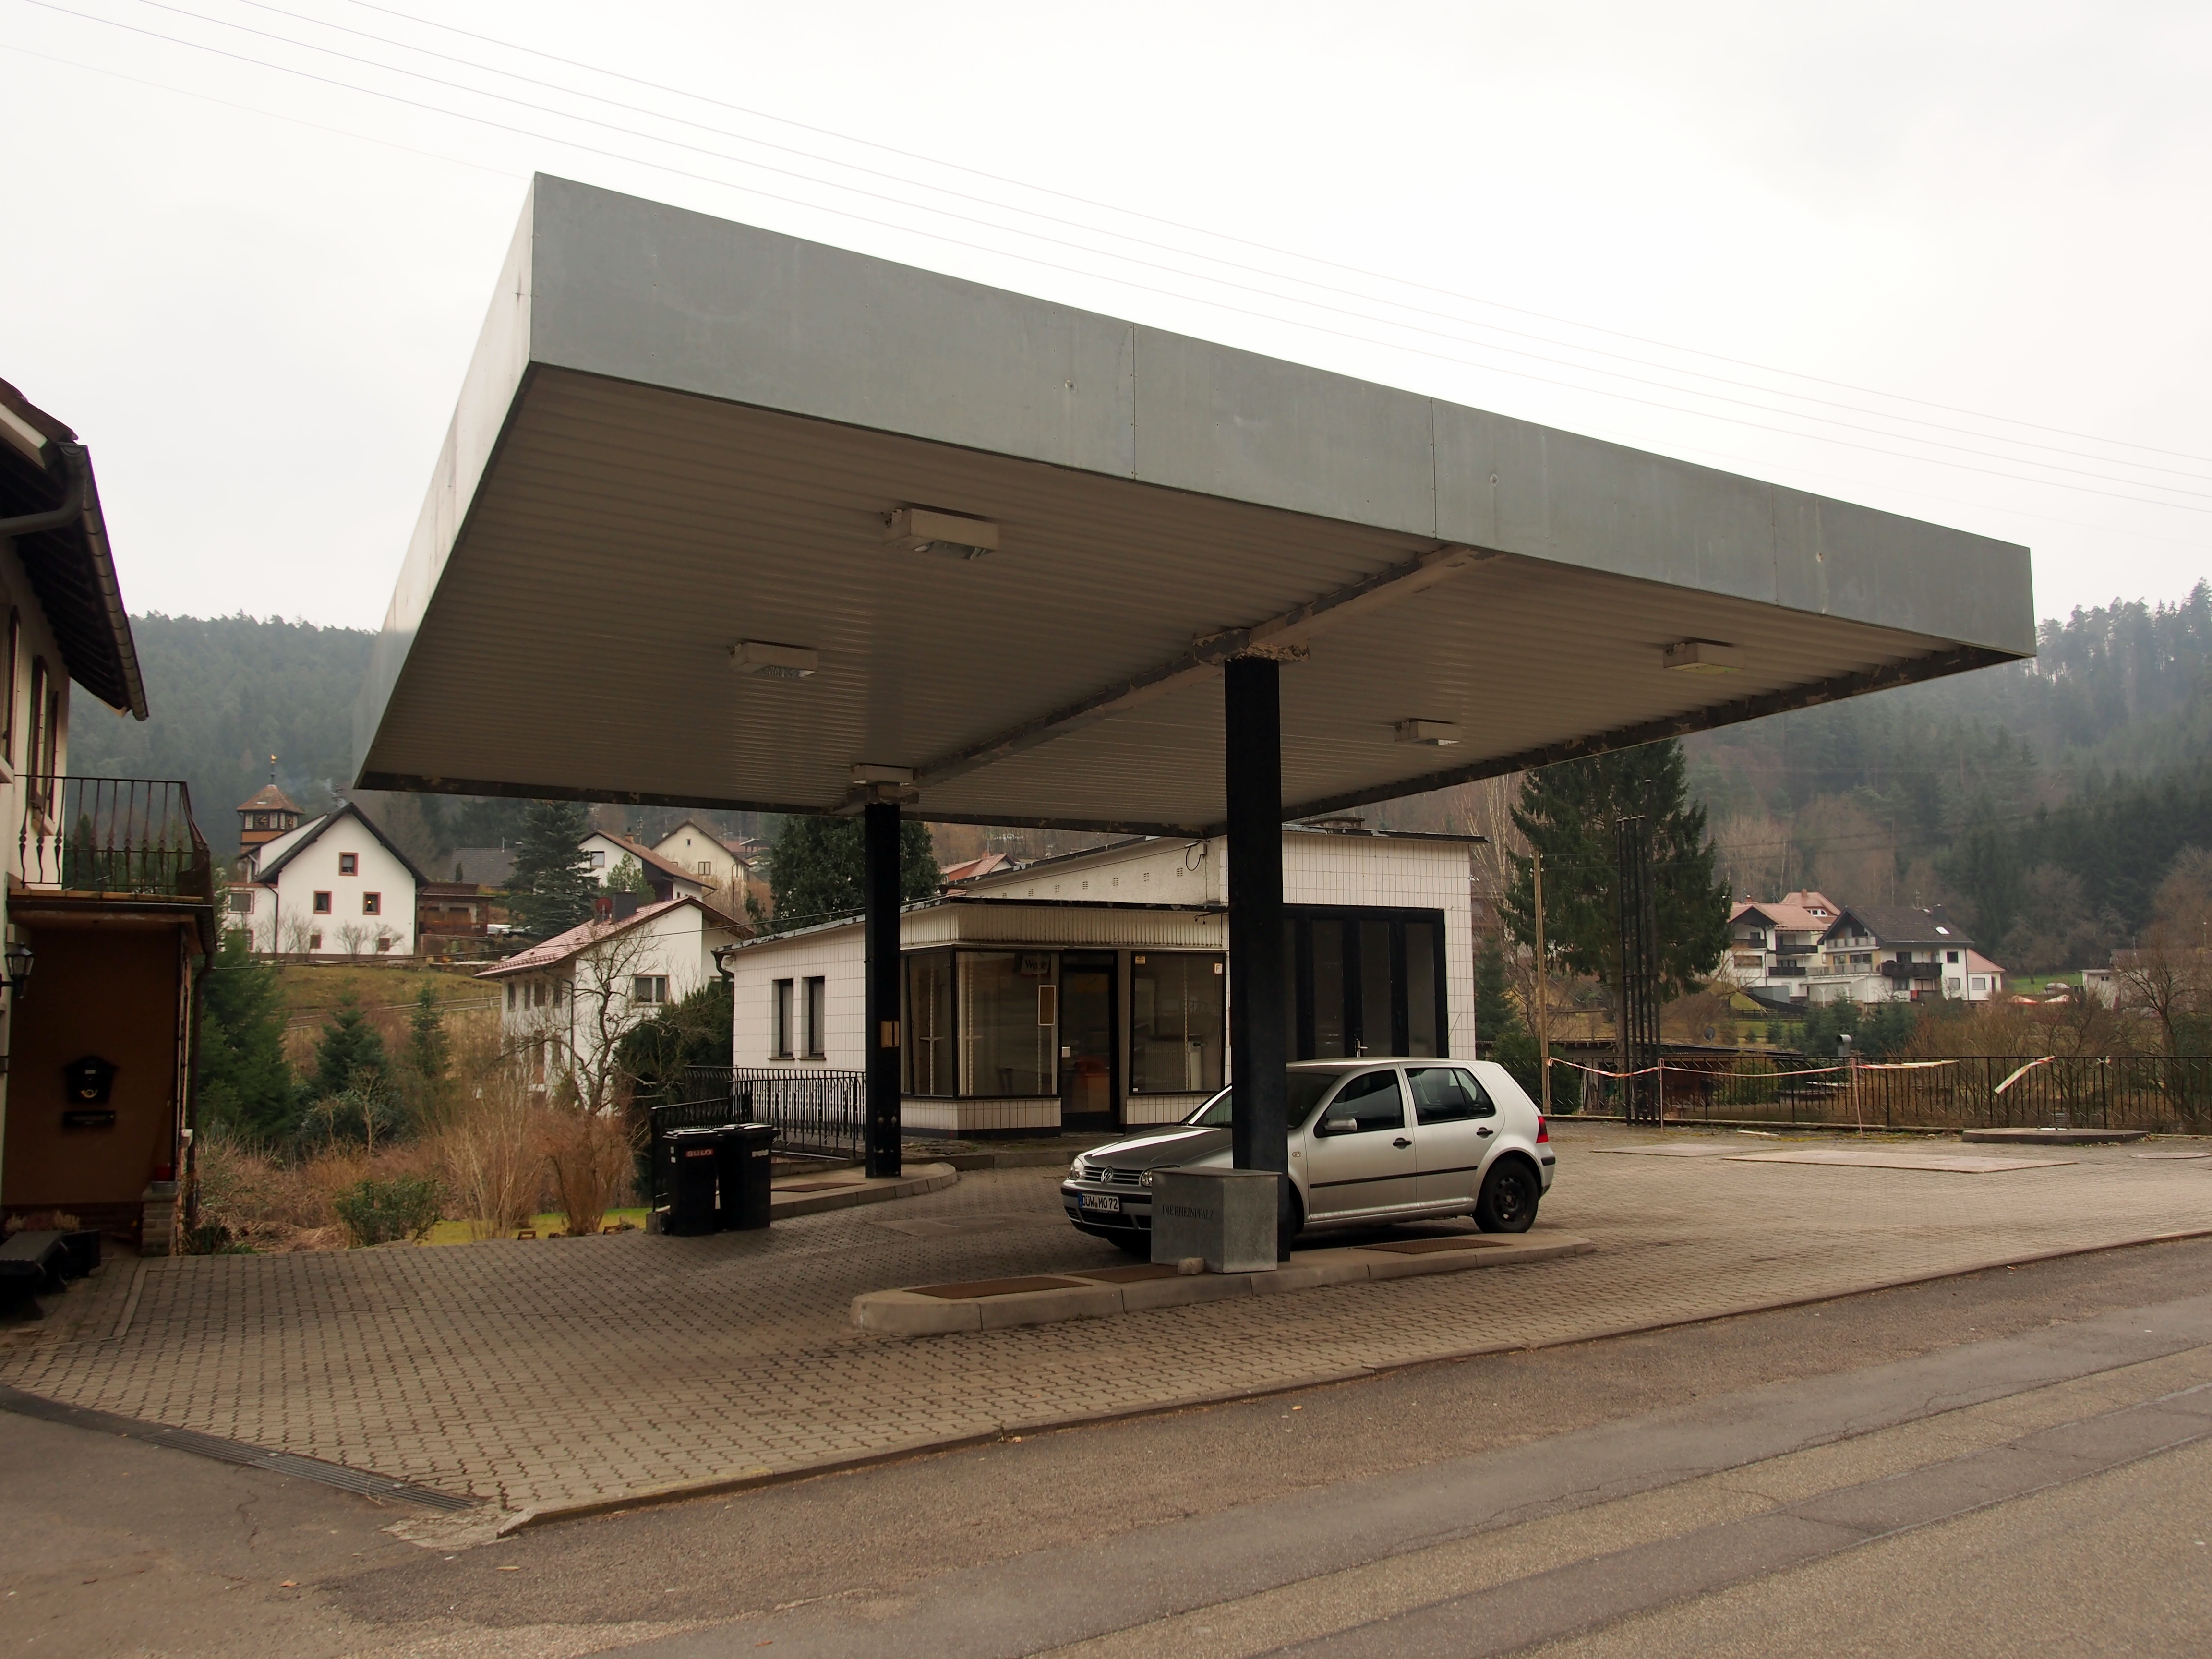 File:Old Petrol station at Elmstein pic2.JPG - Wikimedia Commons